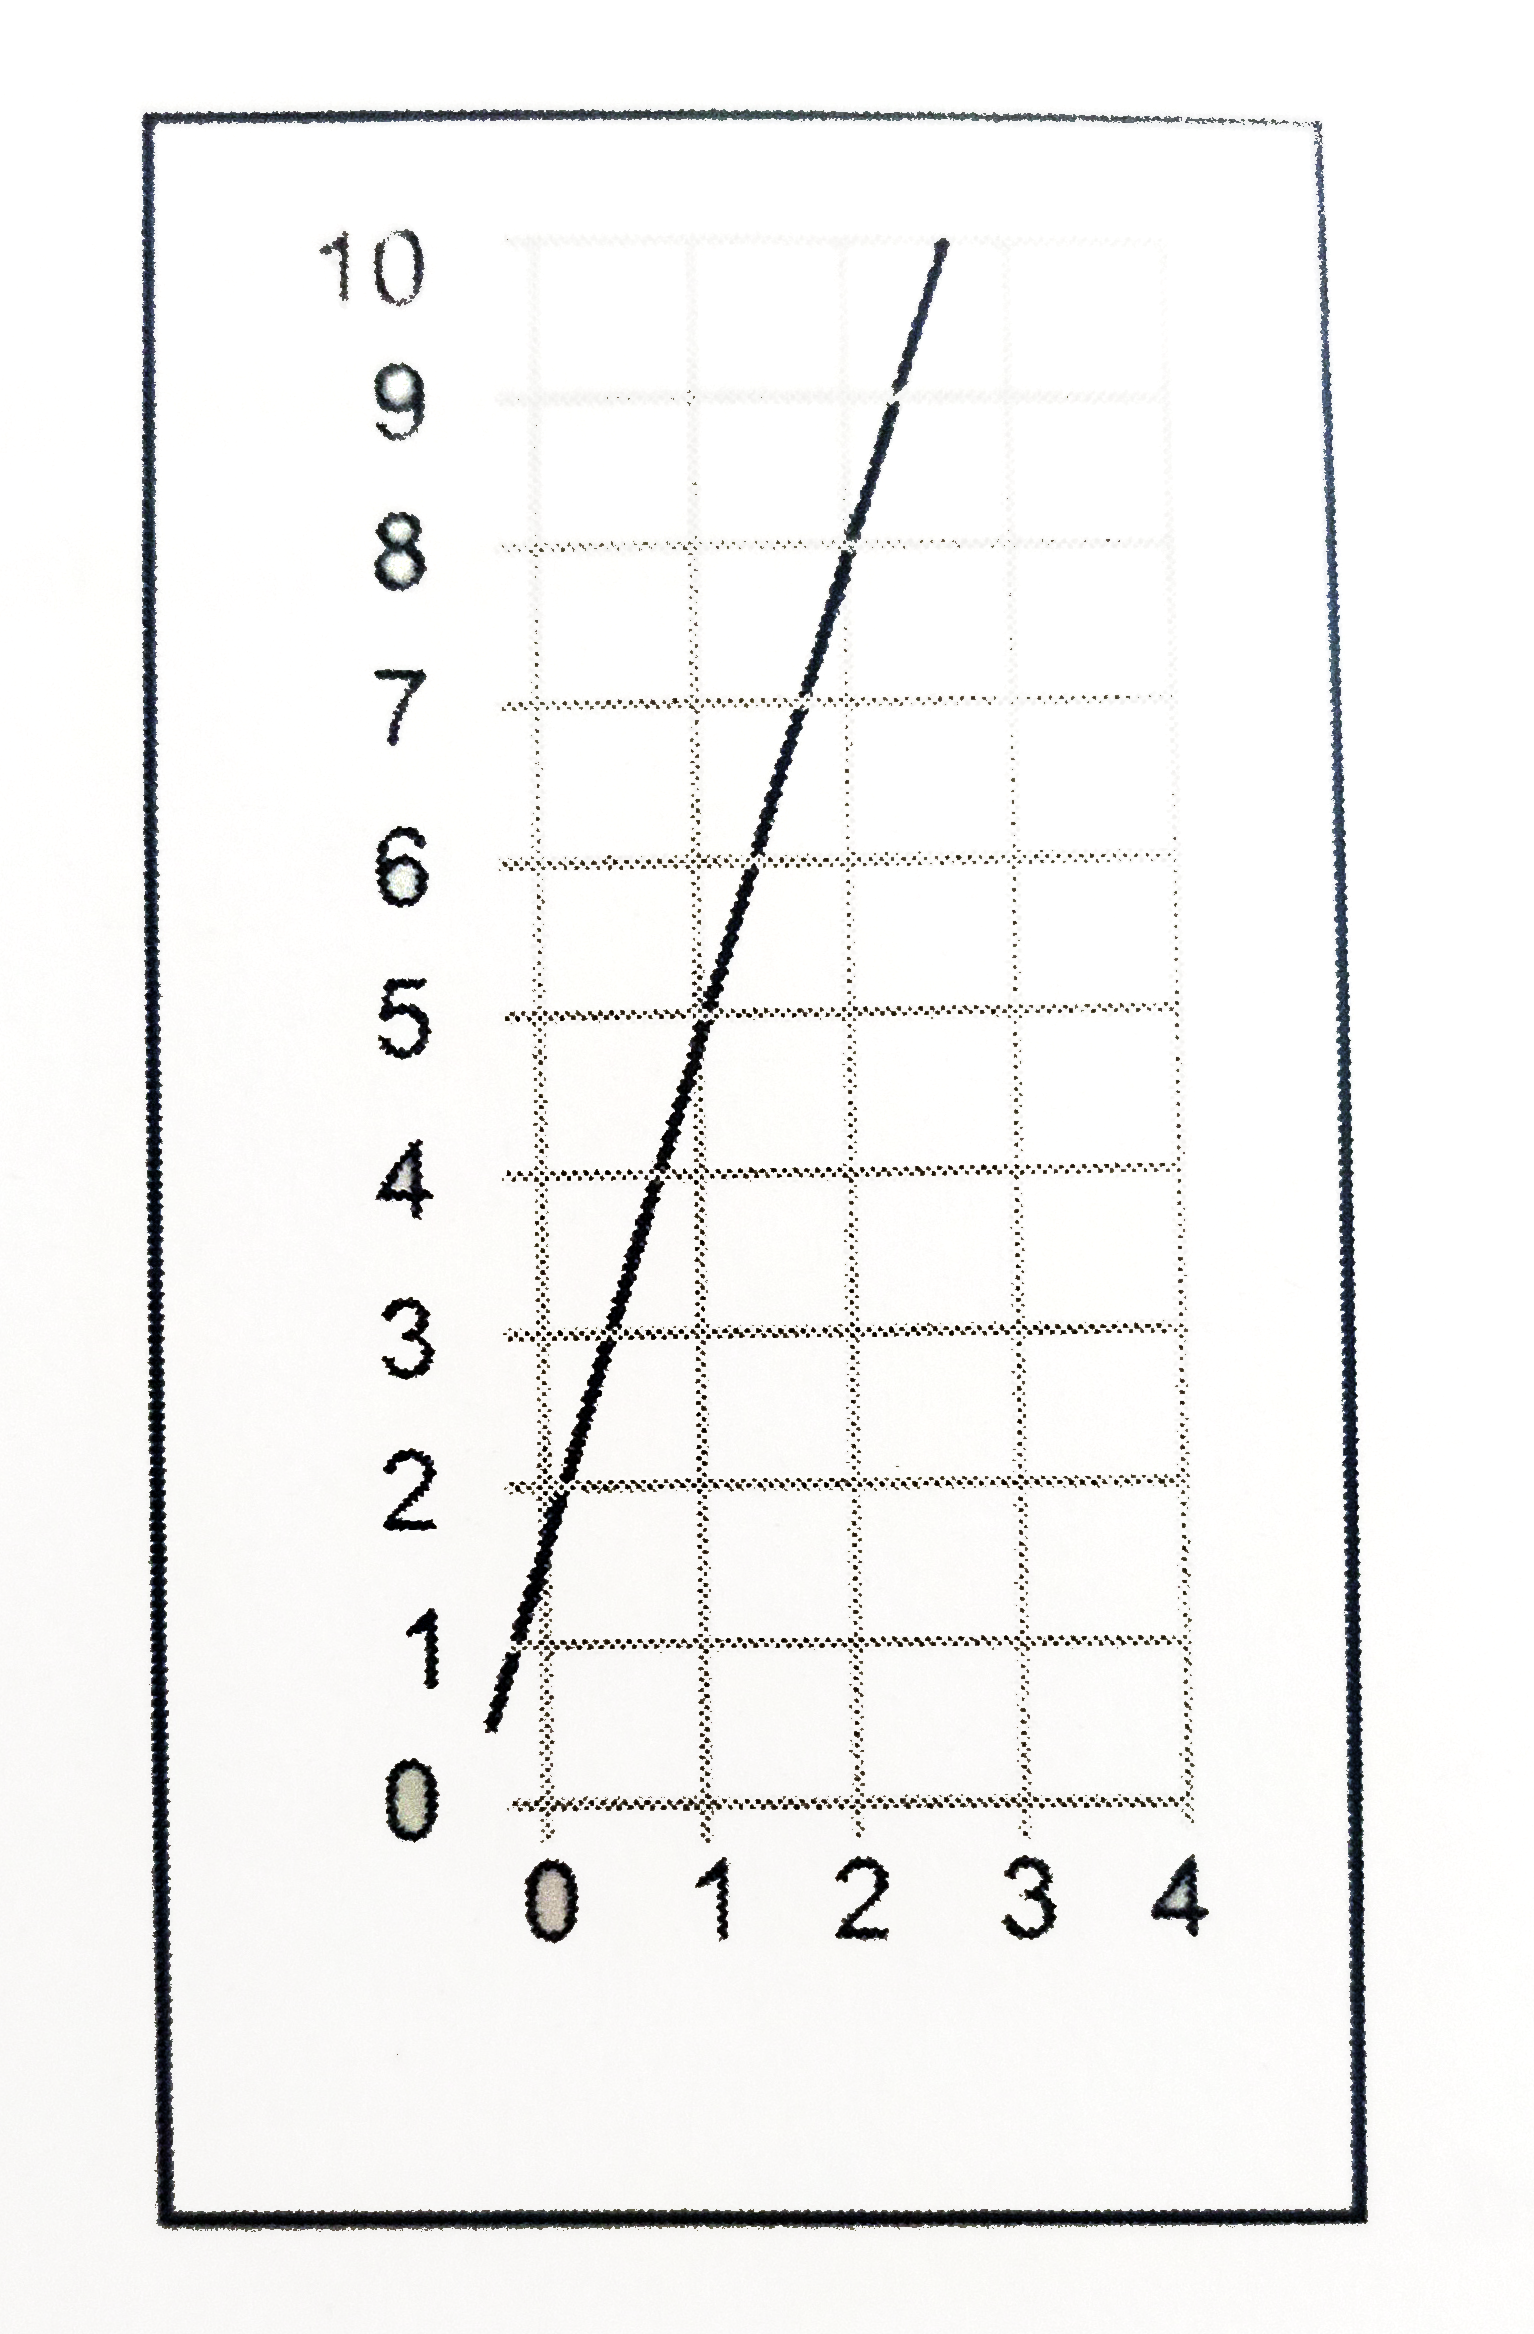 The graphe  above  depicts a staight  line. Which  of the following  options could  be the correct  equation of the  line shown?